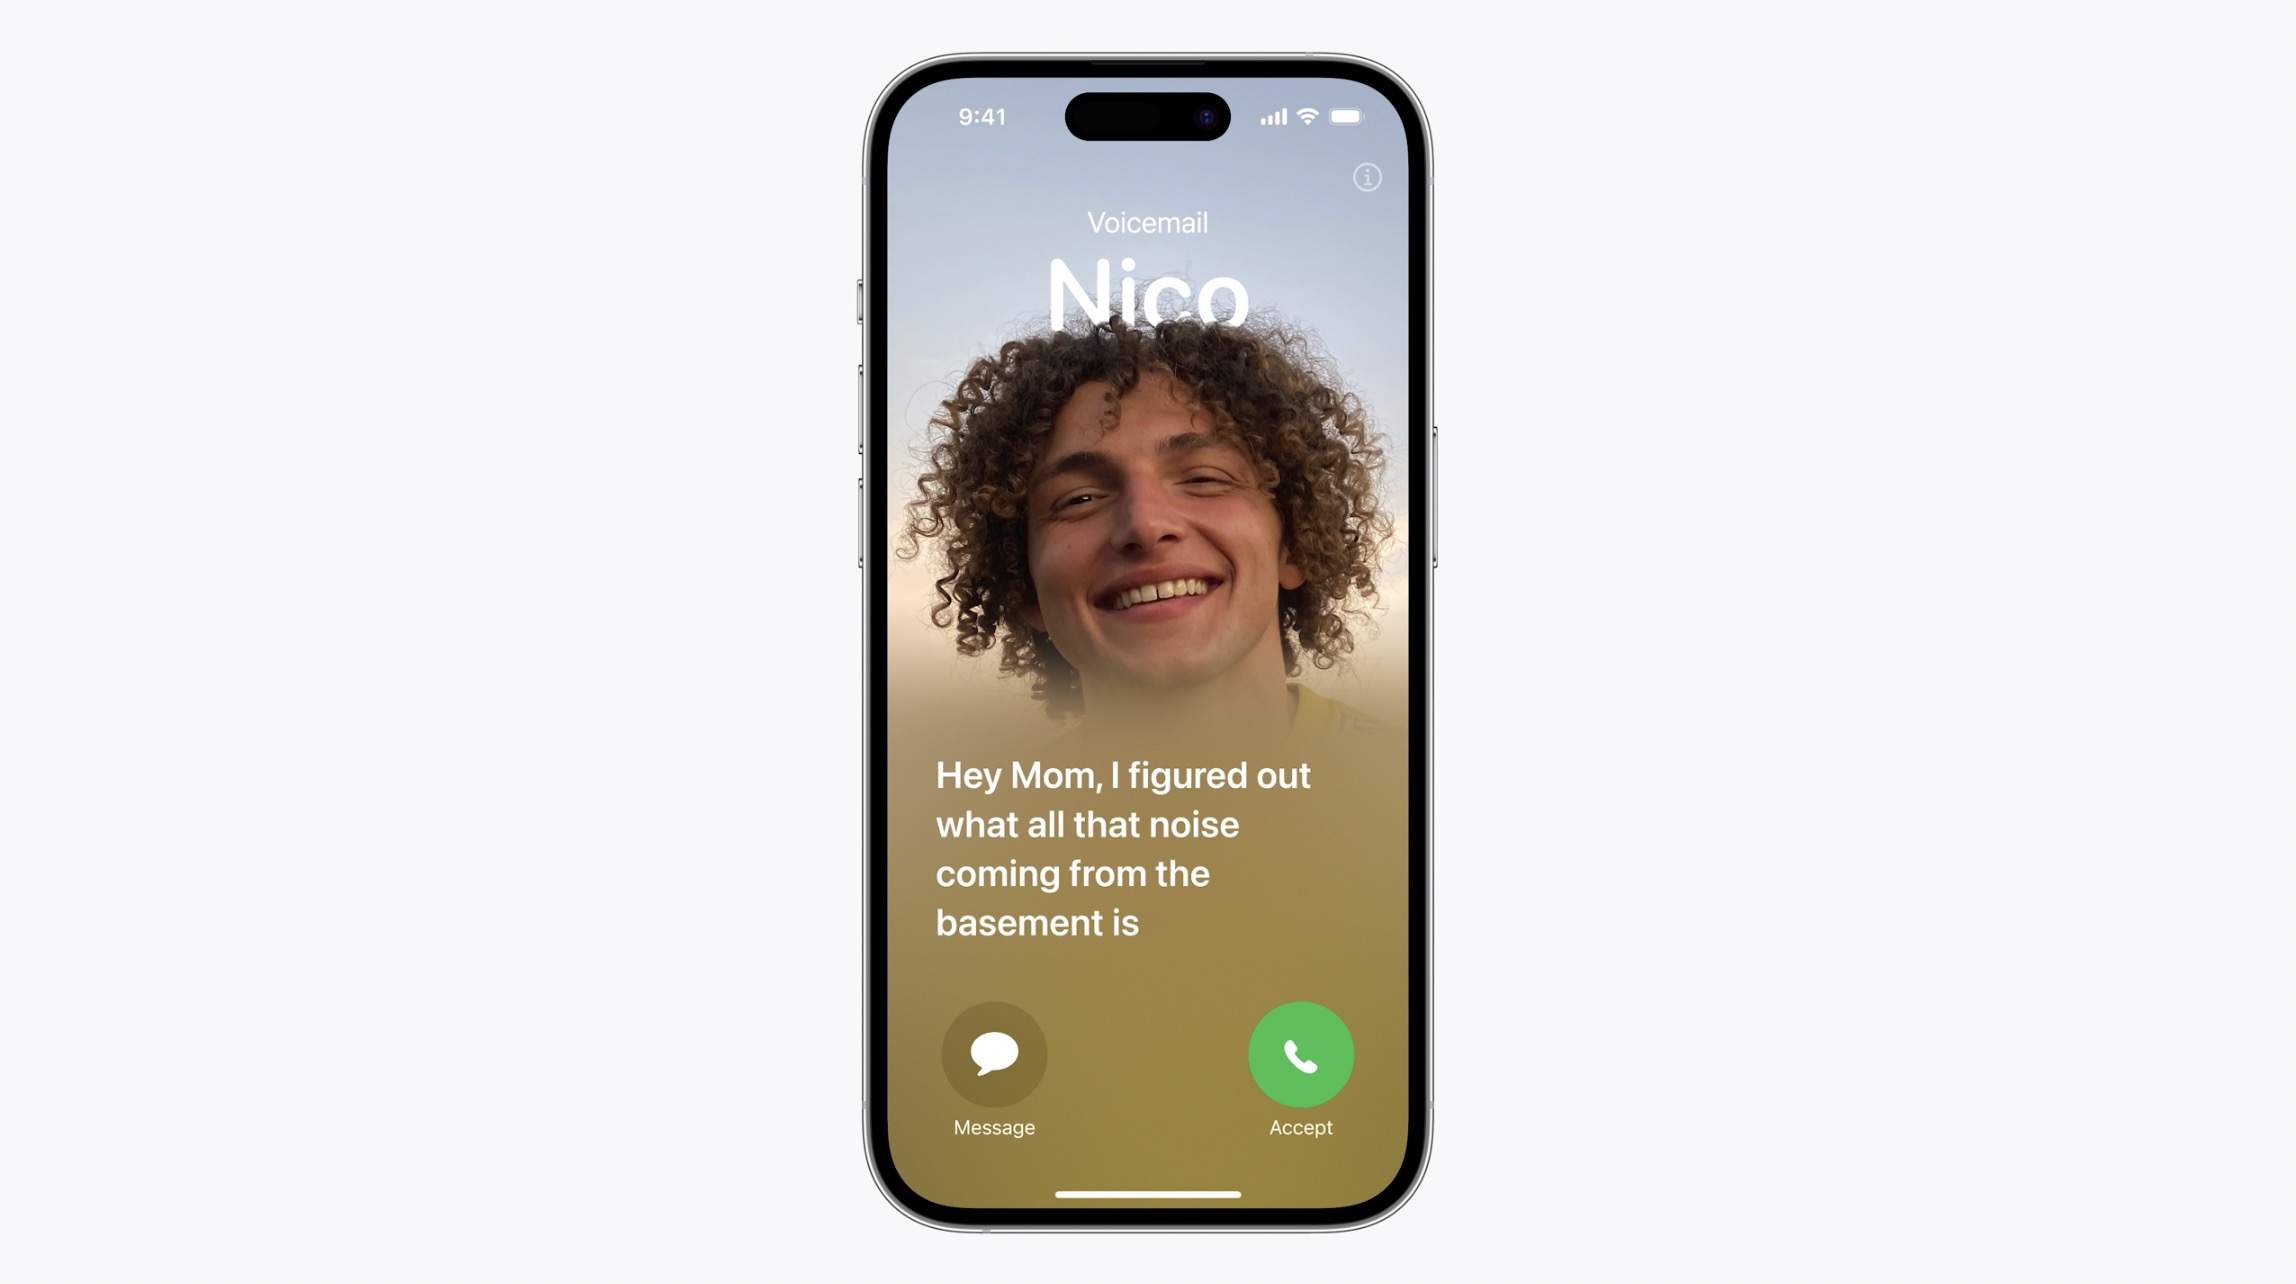 iOS 17 features: Live Voicemail